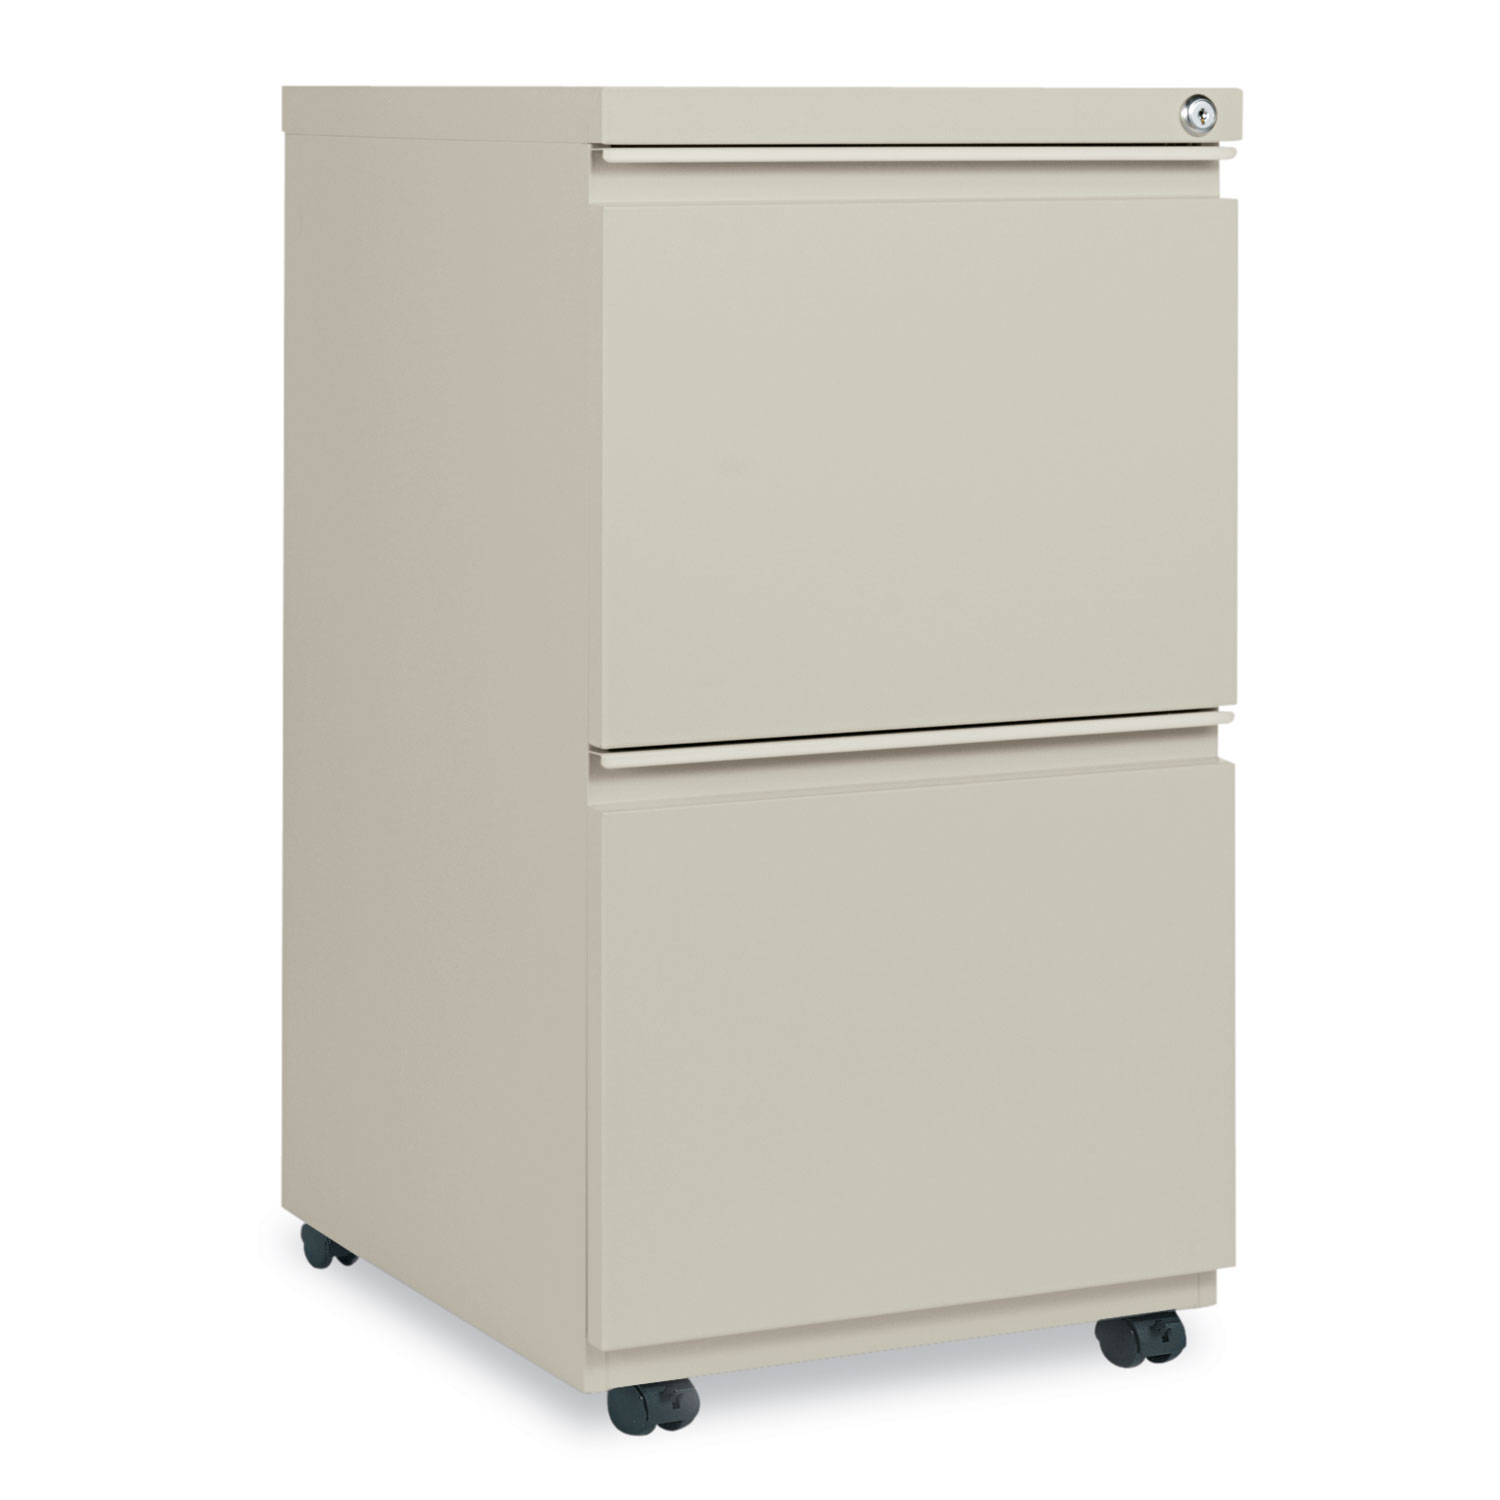  Alera ALEPBFFPY Two-Drawer Metal Pedestal File with Full-Length Pull, 14.96w x 19.29d x 27.75h, Putty (ALEPBFFPY) 